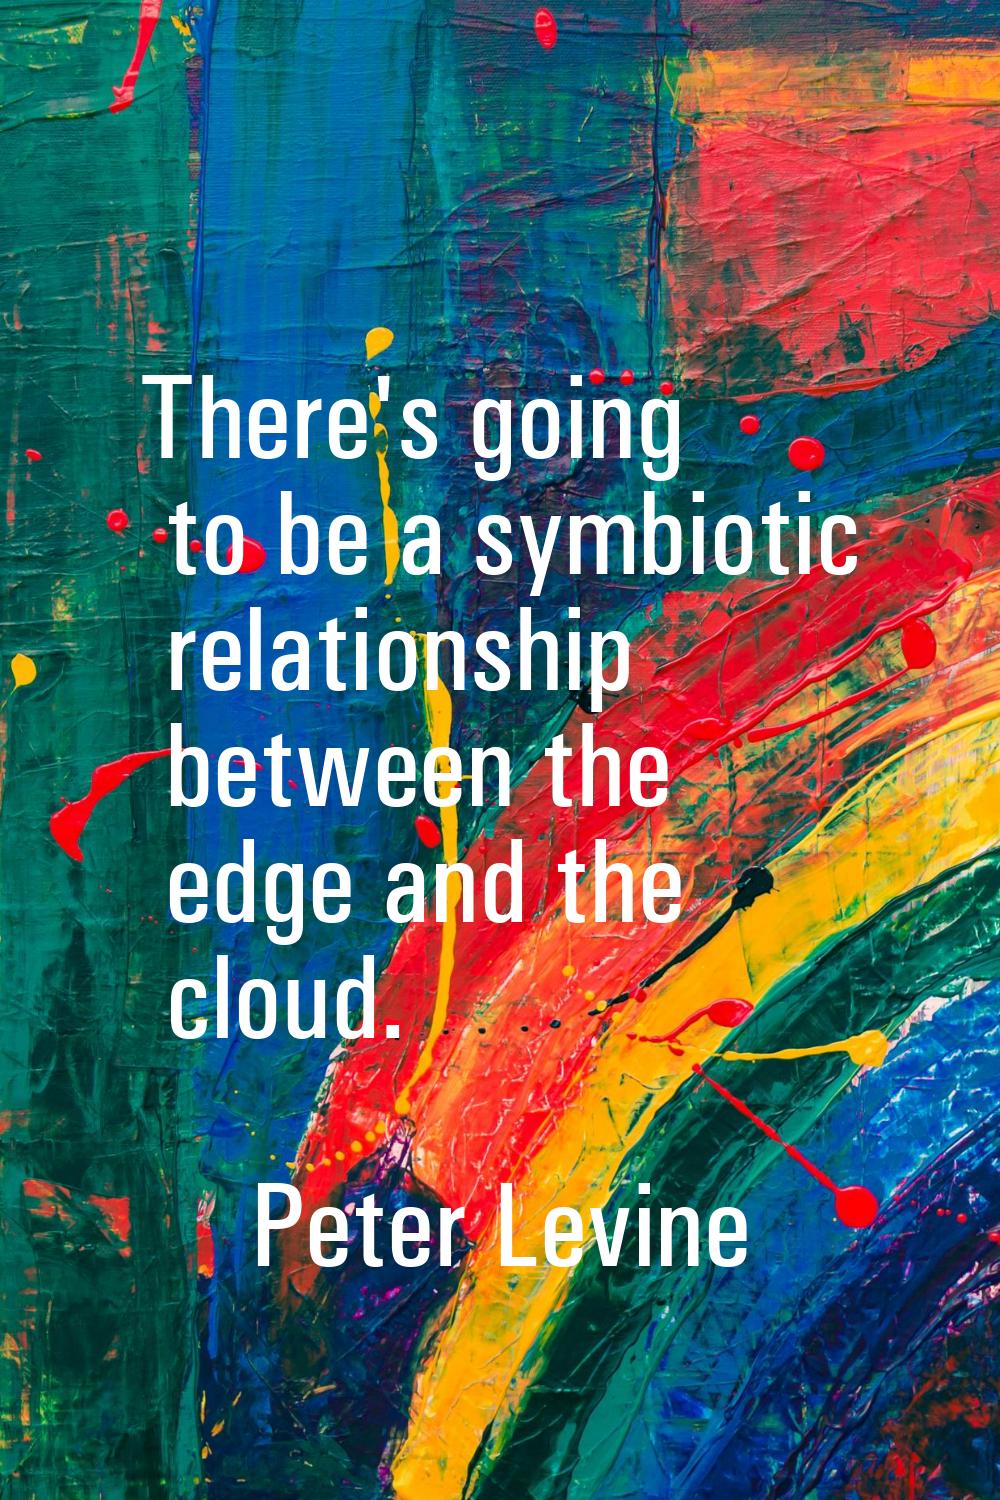 There's going to be a symbiotic relationship between the edge and the cloud.